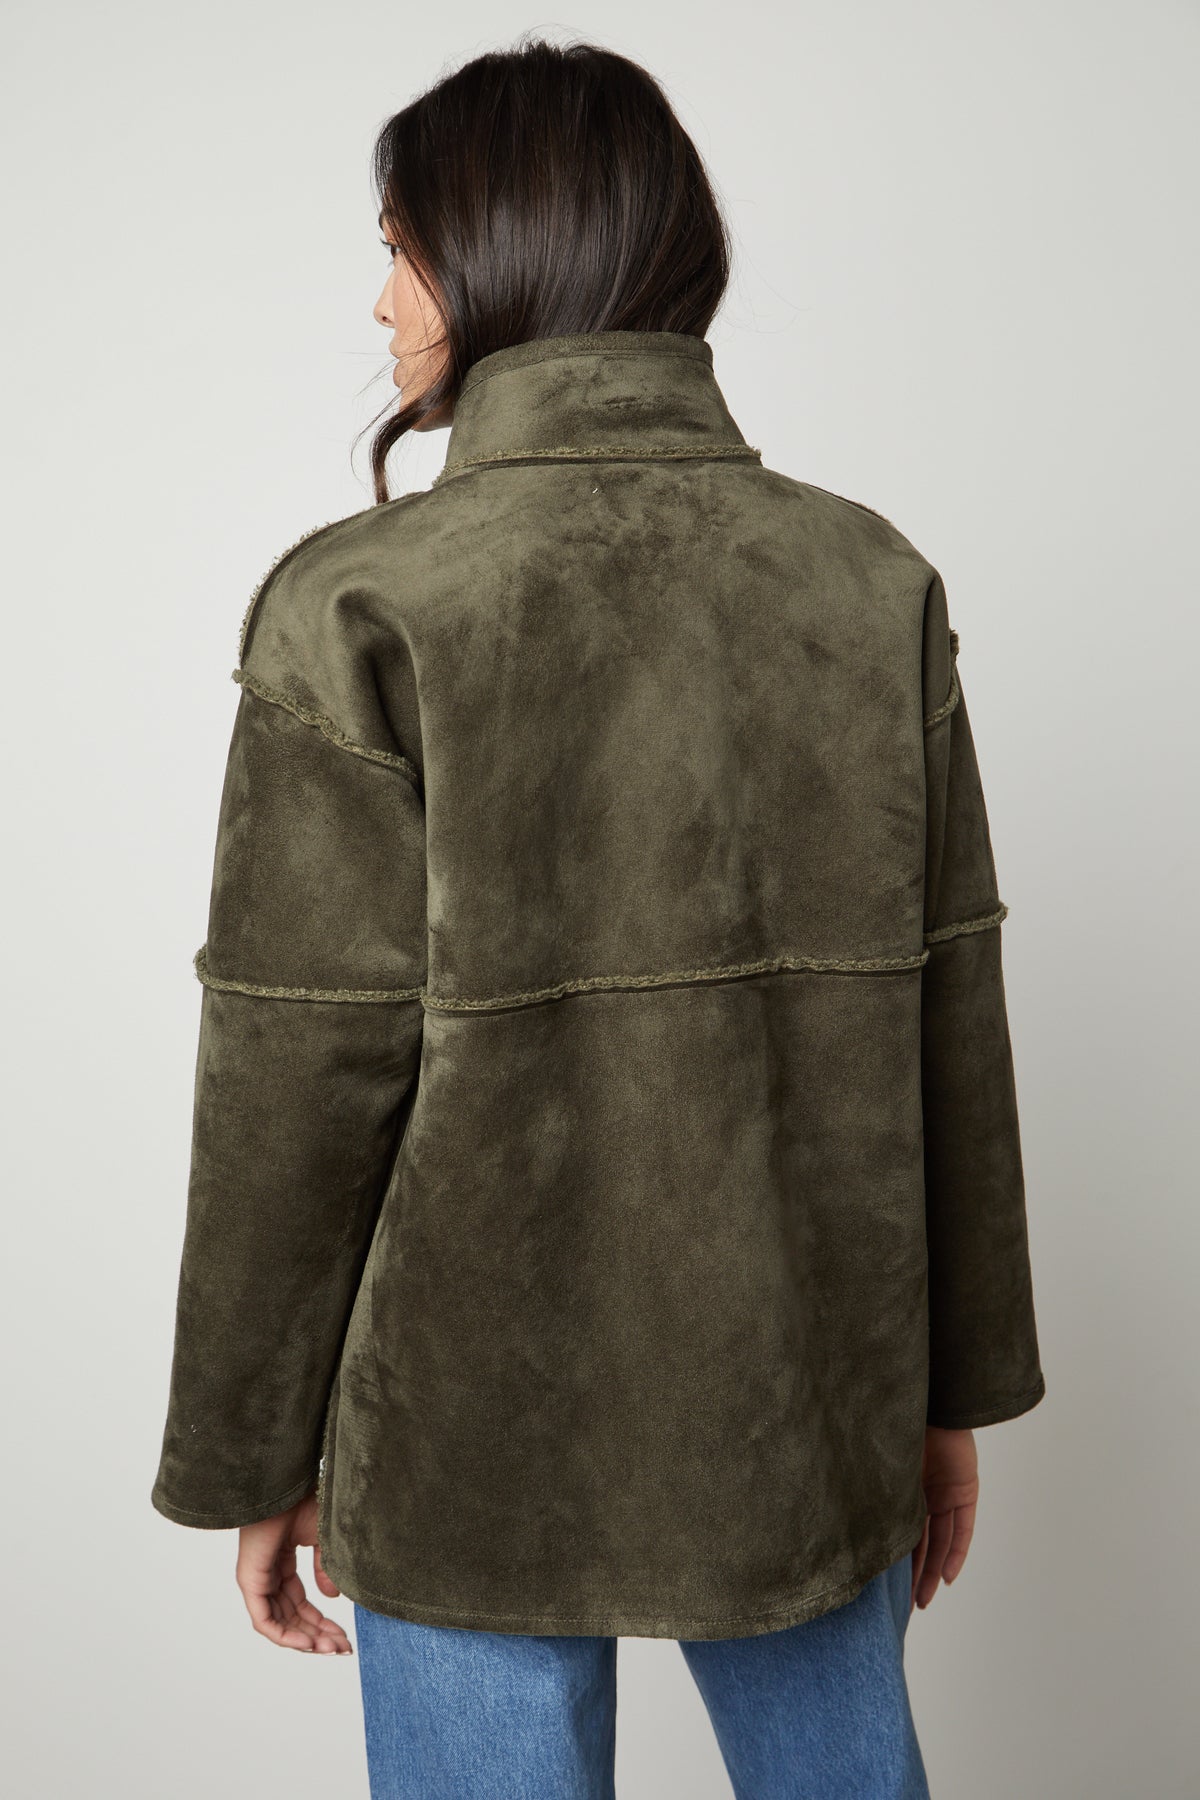   The back view of a woman wearing the Velvet by Graham & Spencer ALBANY LUX SHERPA REVERSIBLE JACKET. 